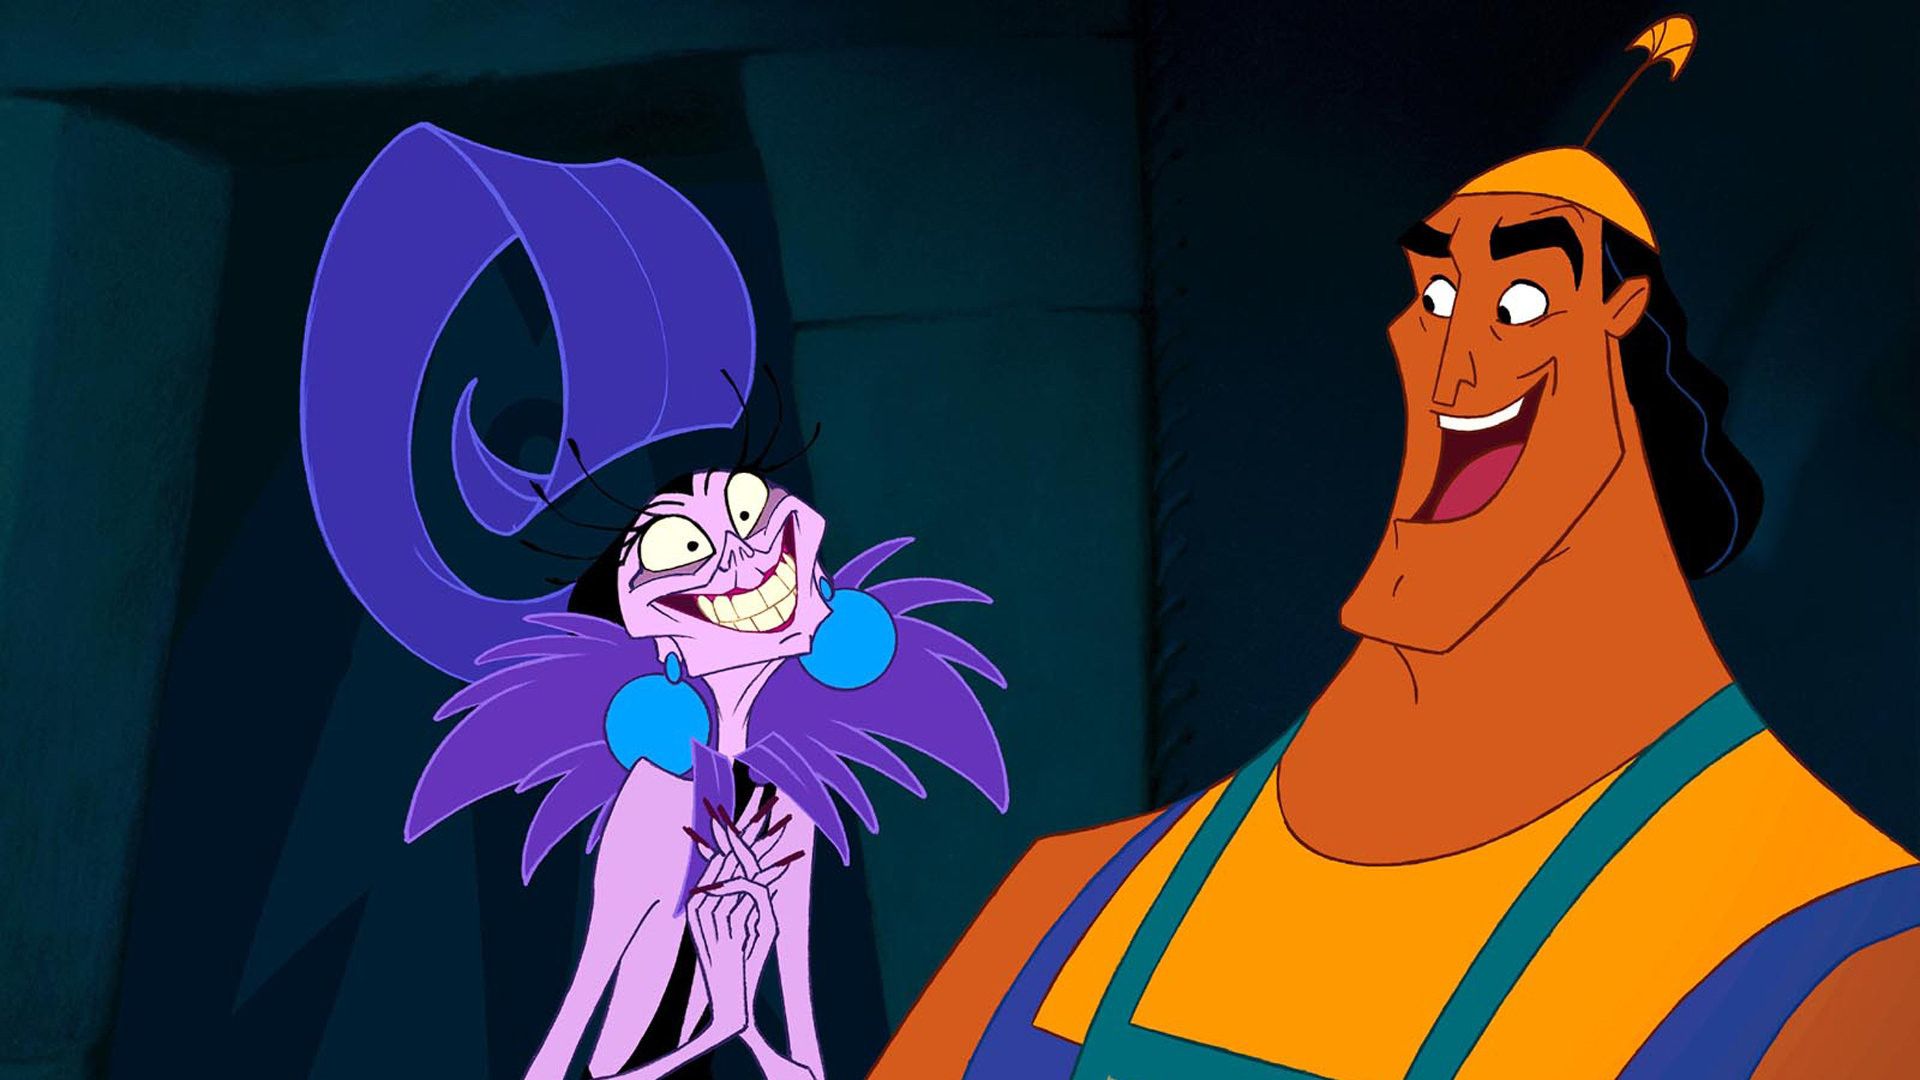 The Emperors New Groove Wallpaper. Cartoon Wallpaper. Yzma and kronk, The emperor's new groove, Emperors new groove